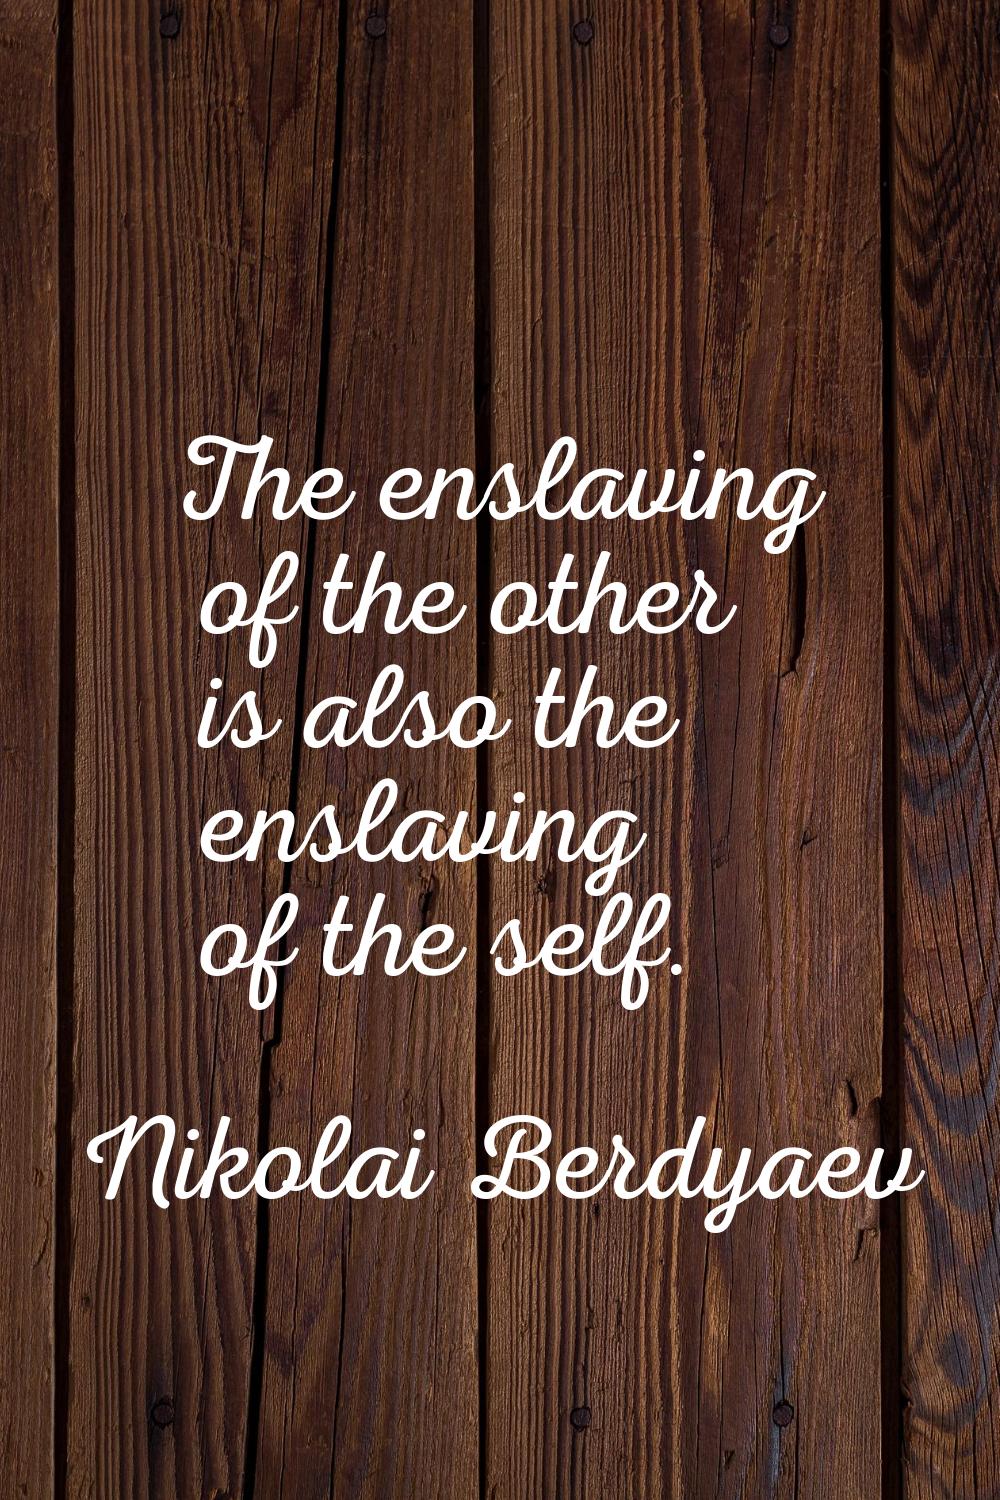 The enslaving of the other is also the enslaving of the self.